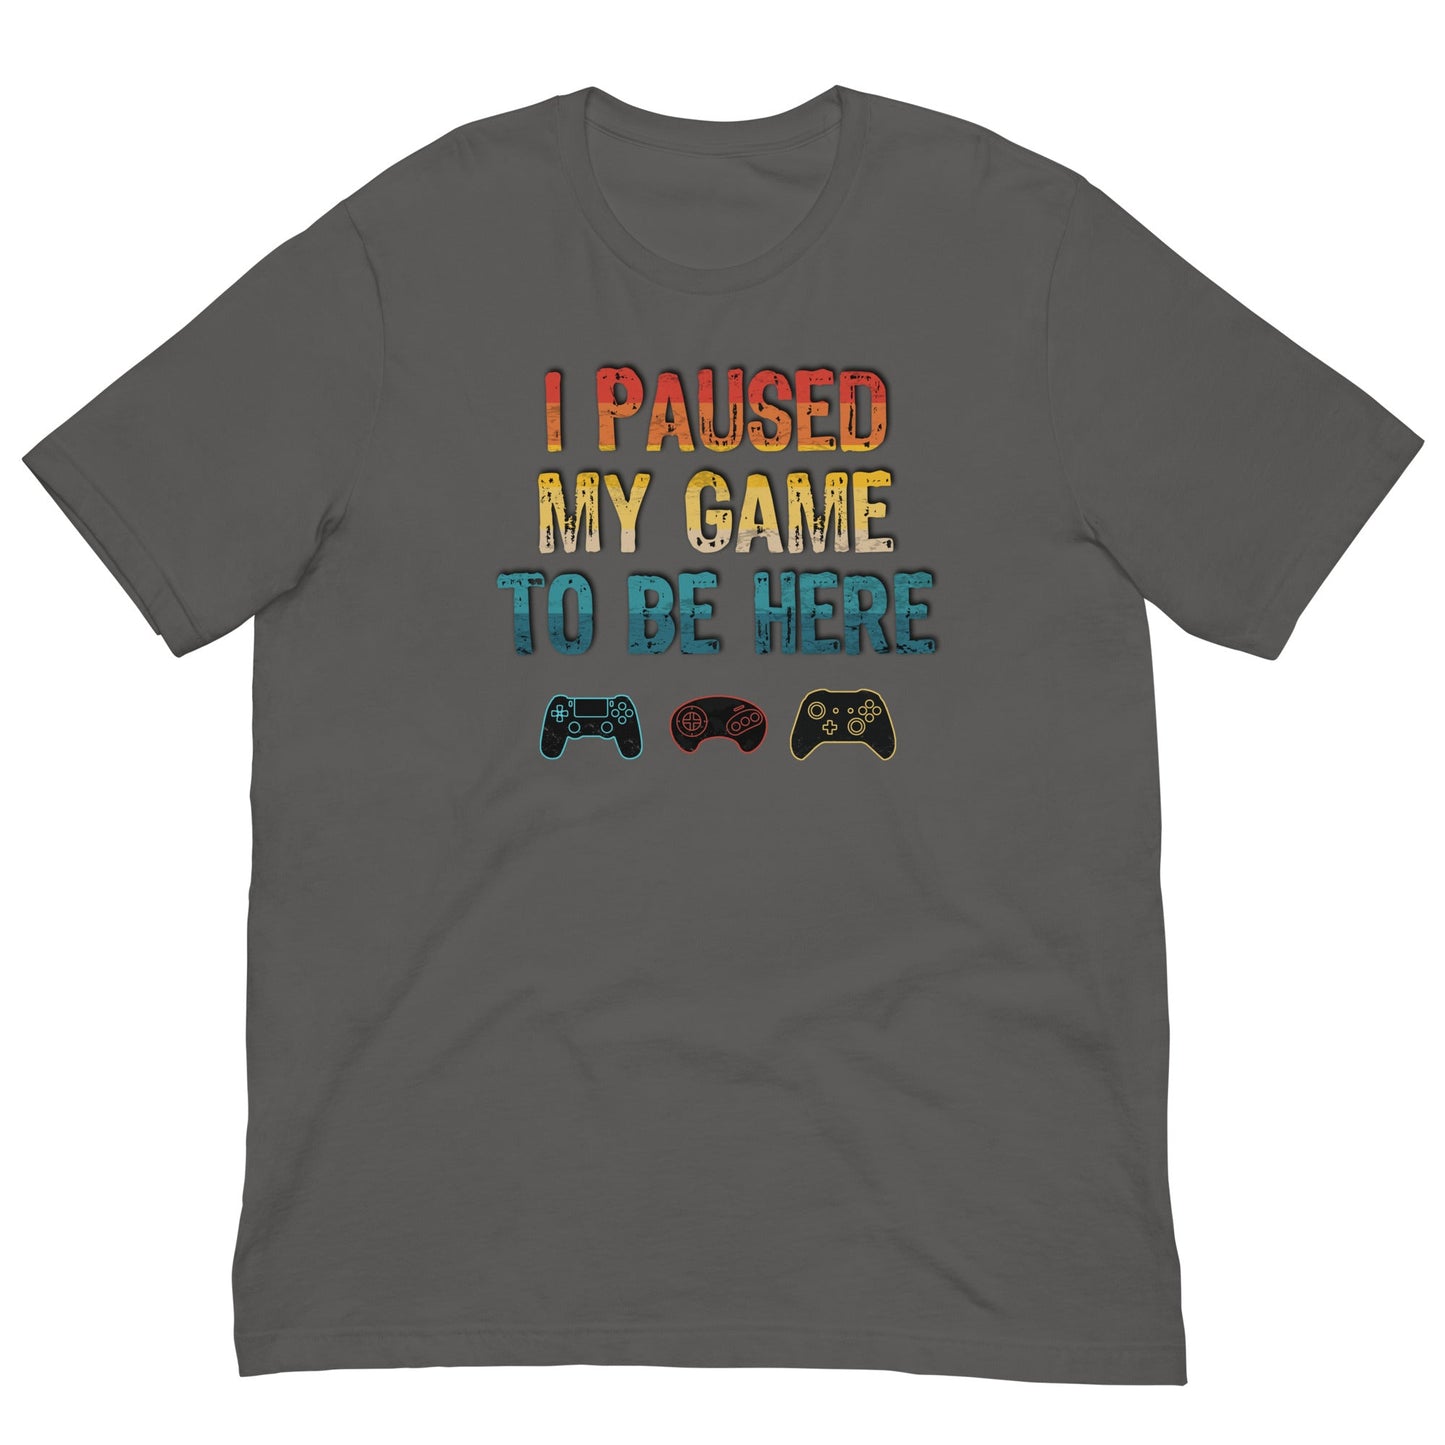 Scar Design Asphalt / S I paused my game to be here T-shirt